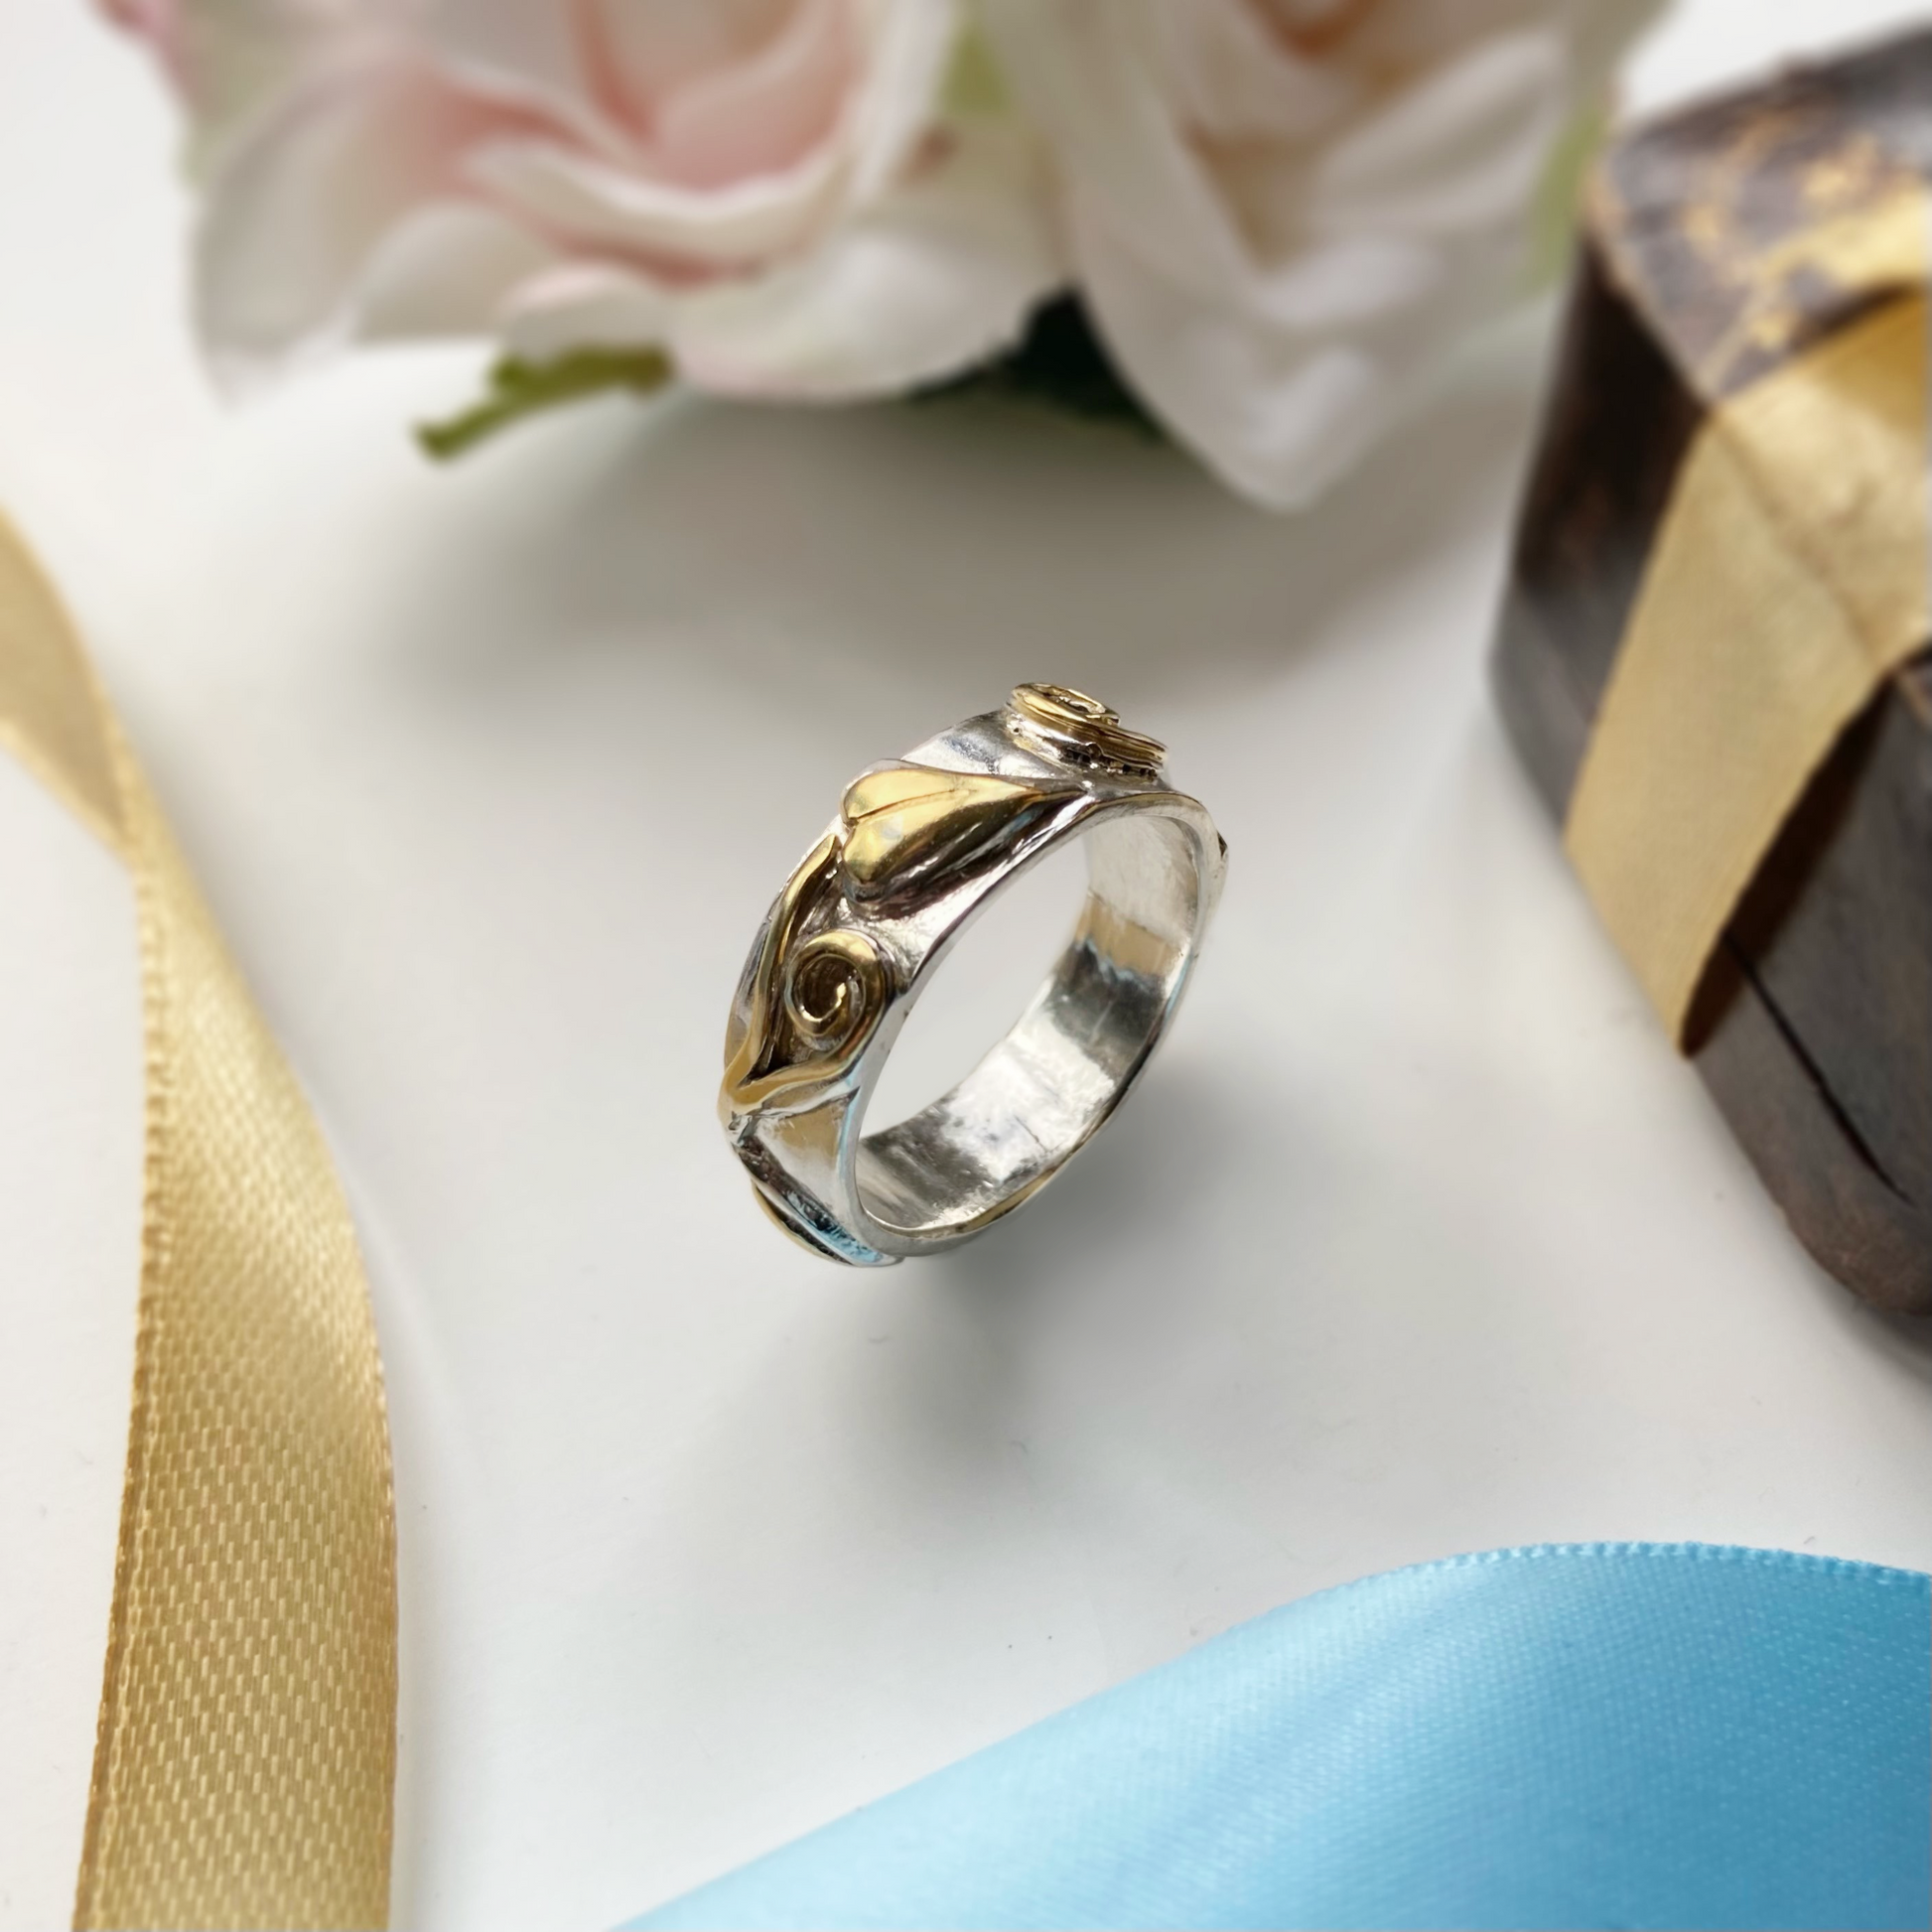 wide two colour gold ring with scroll and leaf detail, with gold ribbon and vintage box in background